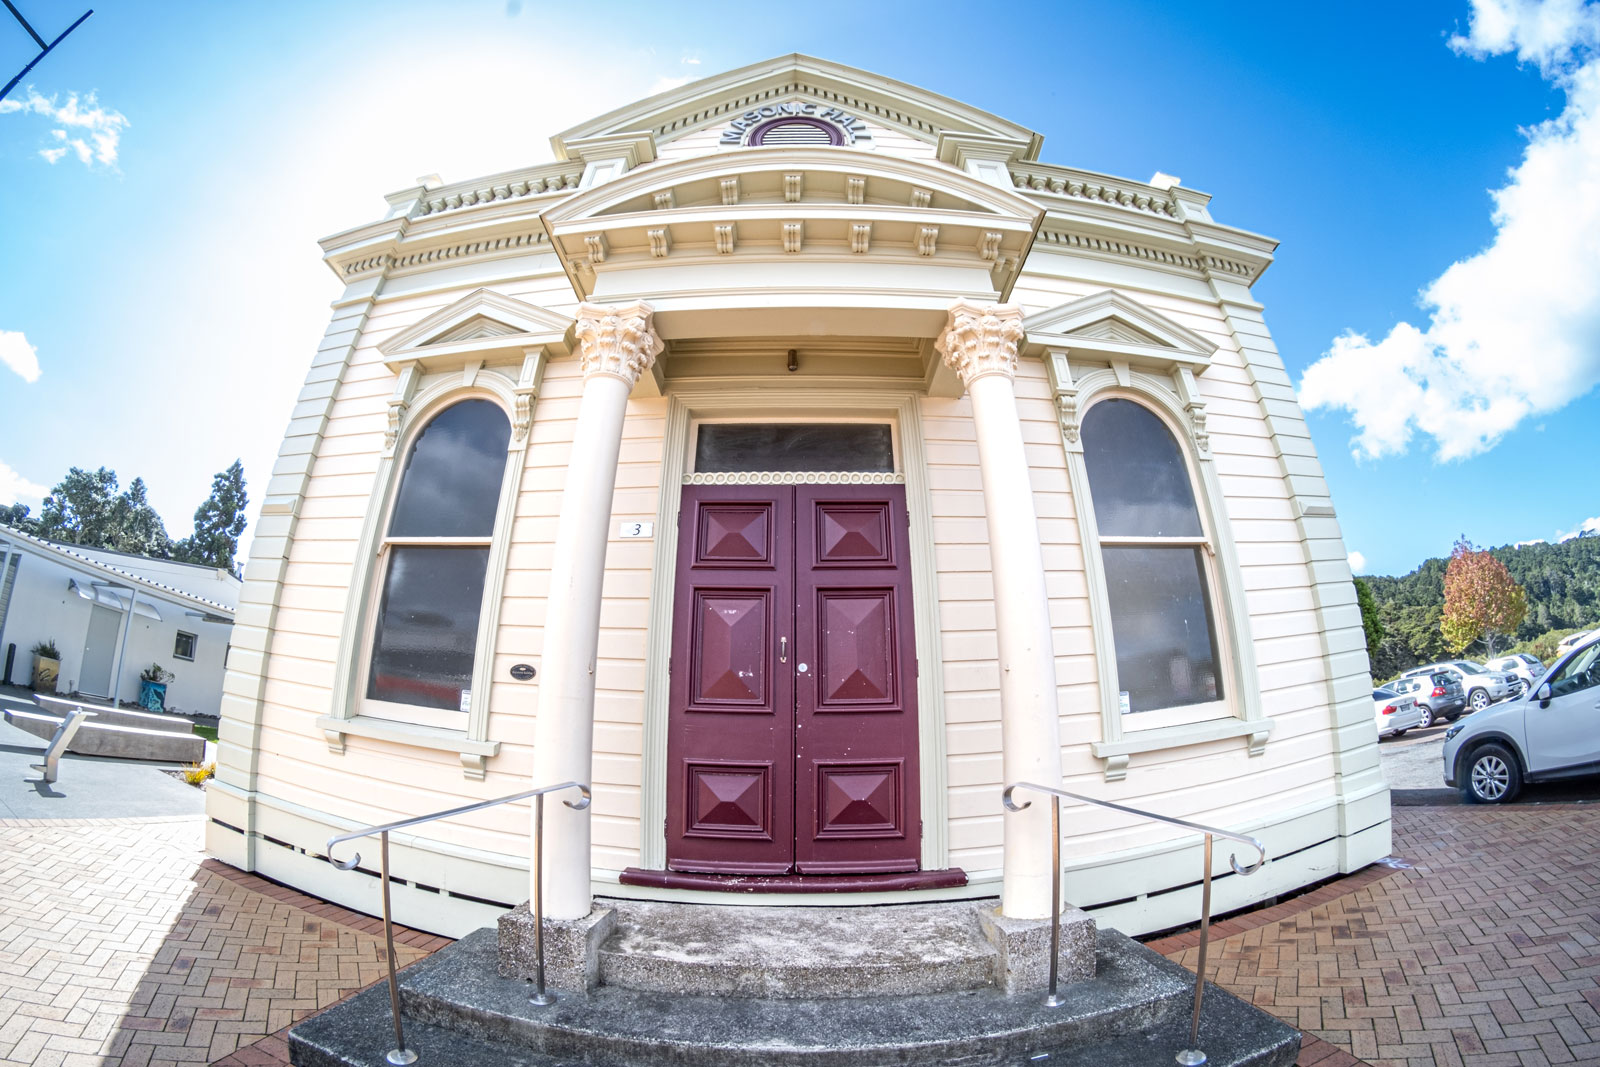 The Masonic Hall, Warkworth, North Auckland, New Zealand | Tokina SZ 8mm F2.8 E FISH-EYE | Notice that the frame was now taken a foot away from the first stair. The structure's lines are curvier, and the middle of the structure is noticeably pulled-in while the windows seem to be left behind